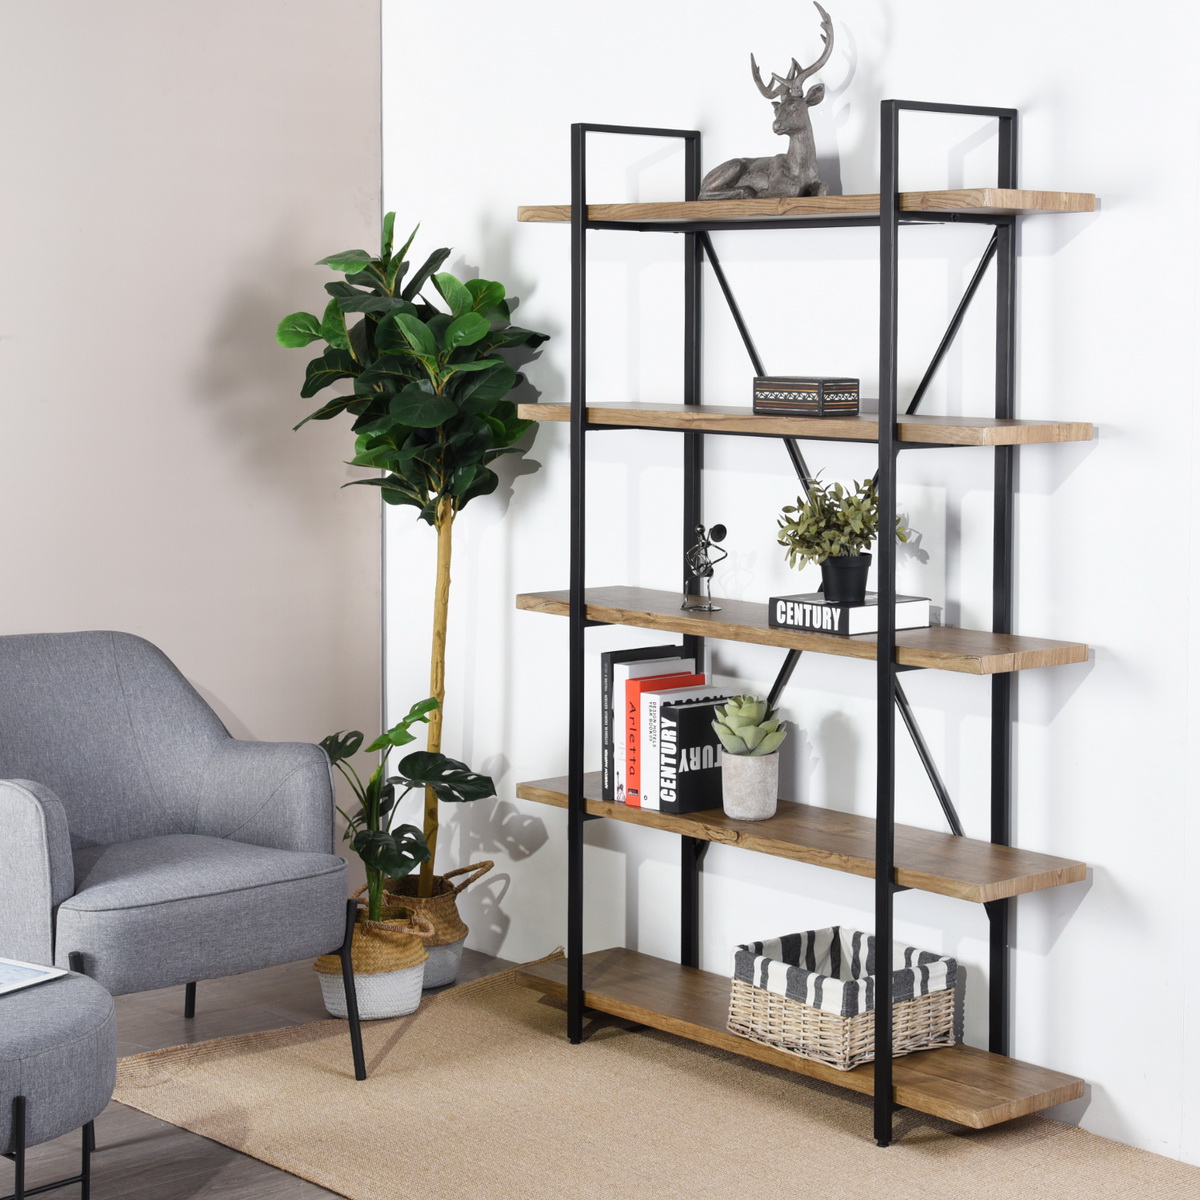 5-Tier Industrial Bookcase With Rustic Wood And Metal Frame, Large Open Bookshelf For Living Room